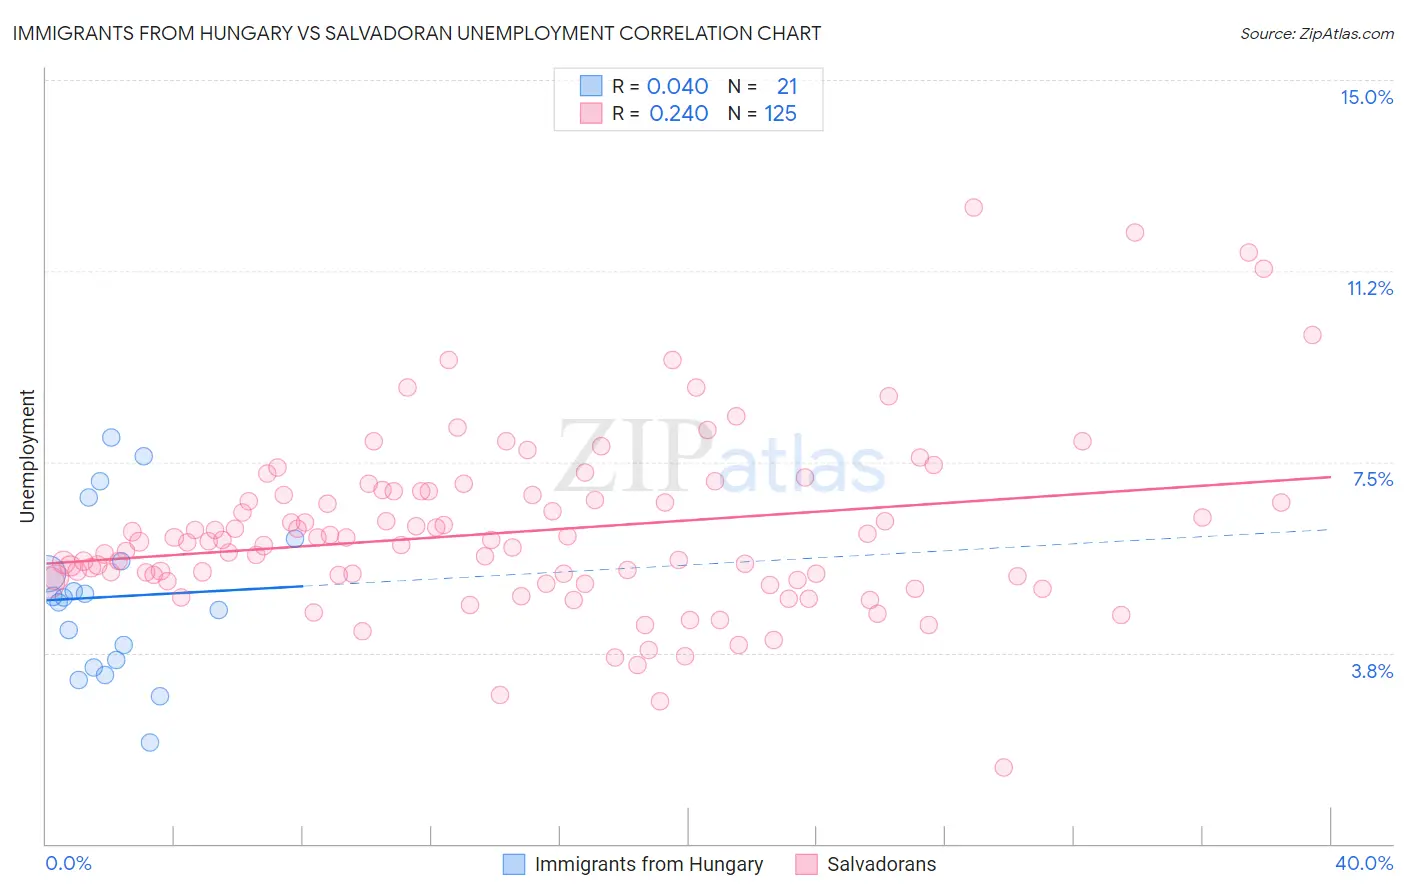 Immigrants from Hungary vs Salvadoran Unemployment